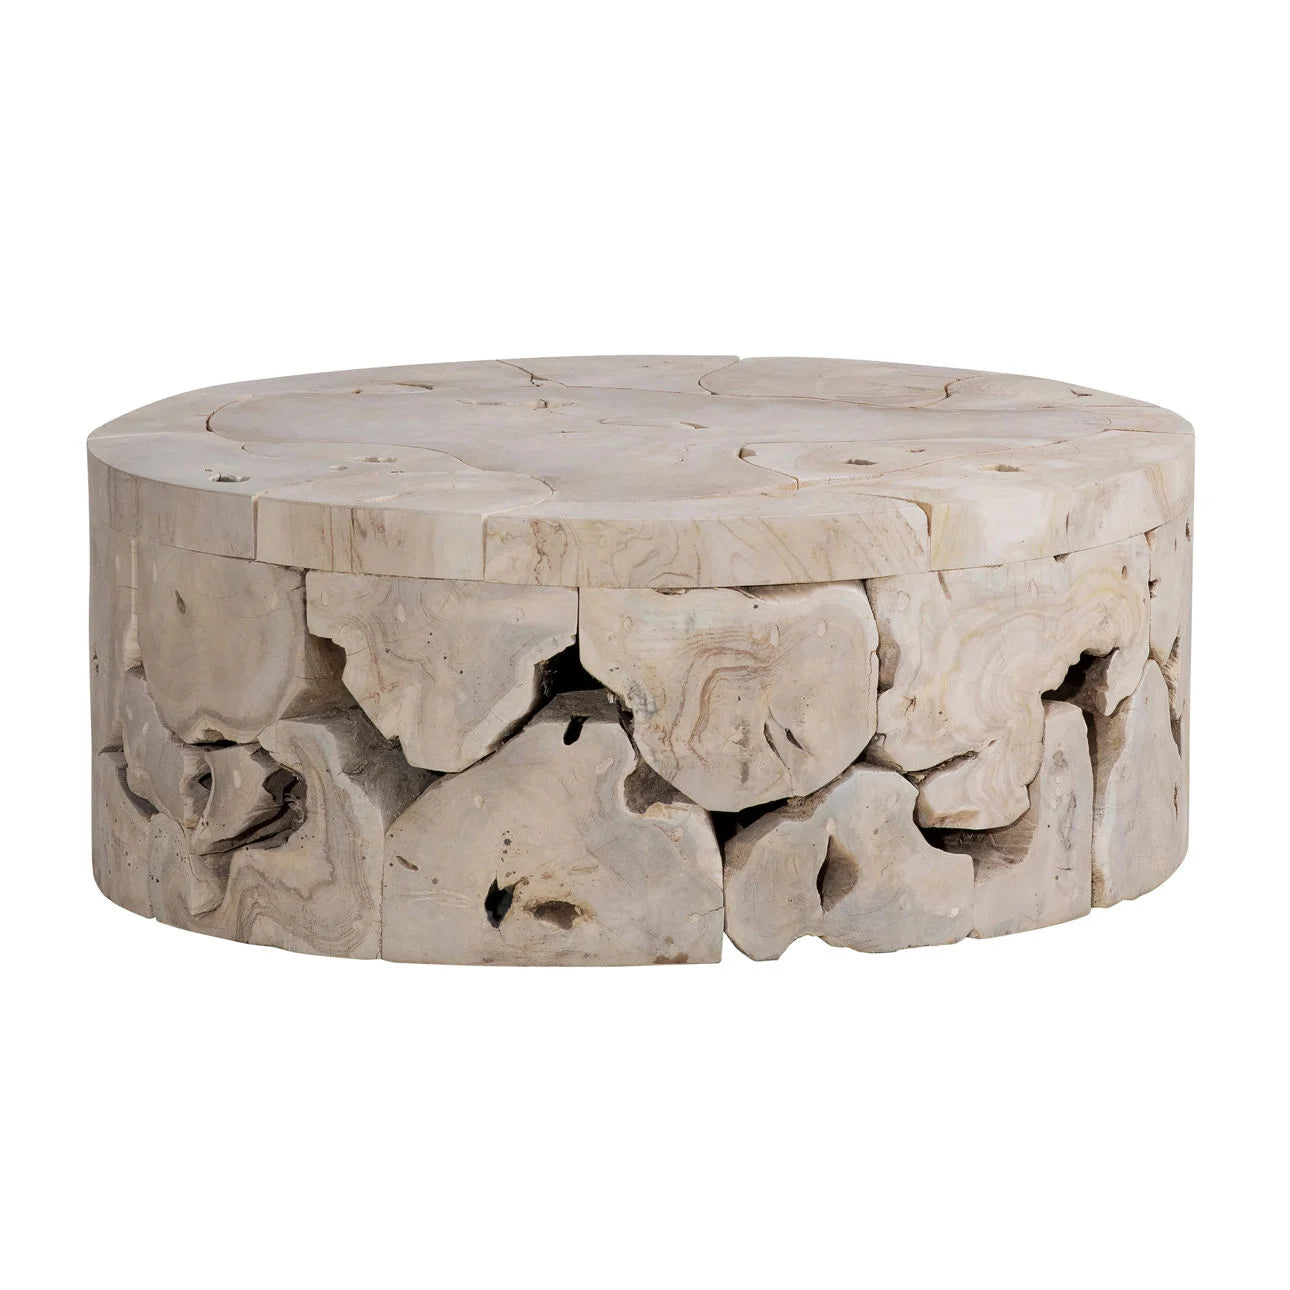 This beautiful Briar Round Coffee Table is pieced together from reclaimed slabs and chunks of solid teak wood finished in a bleached finish with exquisite craftsmanship. Artisans build each coffee table like a puzzle, fitting each piece together in combinations that are never duplicated. Like true works of art, no two will be exactly alike. Amethyst Home provides interior design services, furniture, rugs, and lighting in the Omaha metro area.